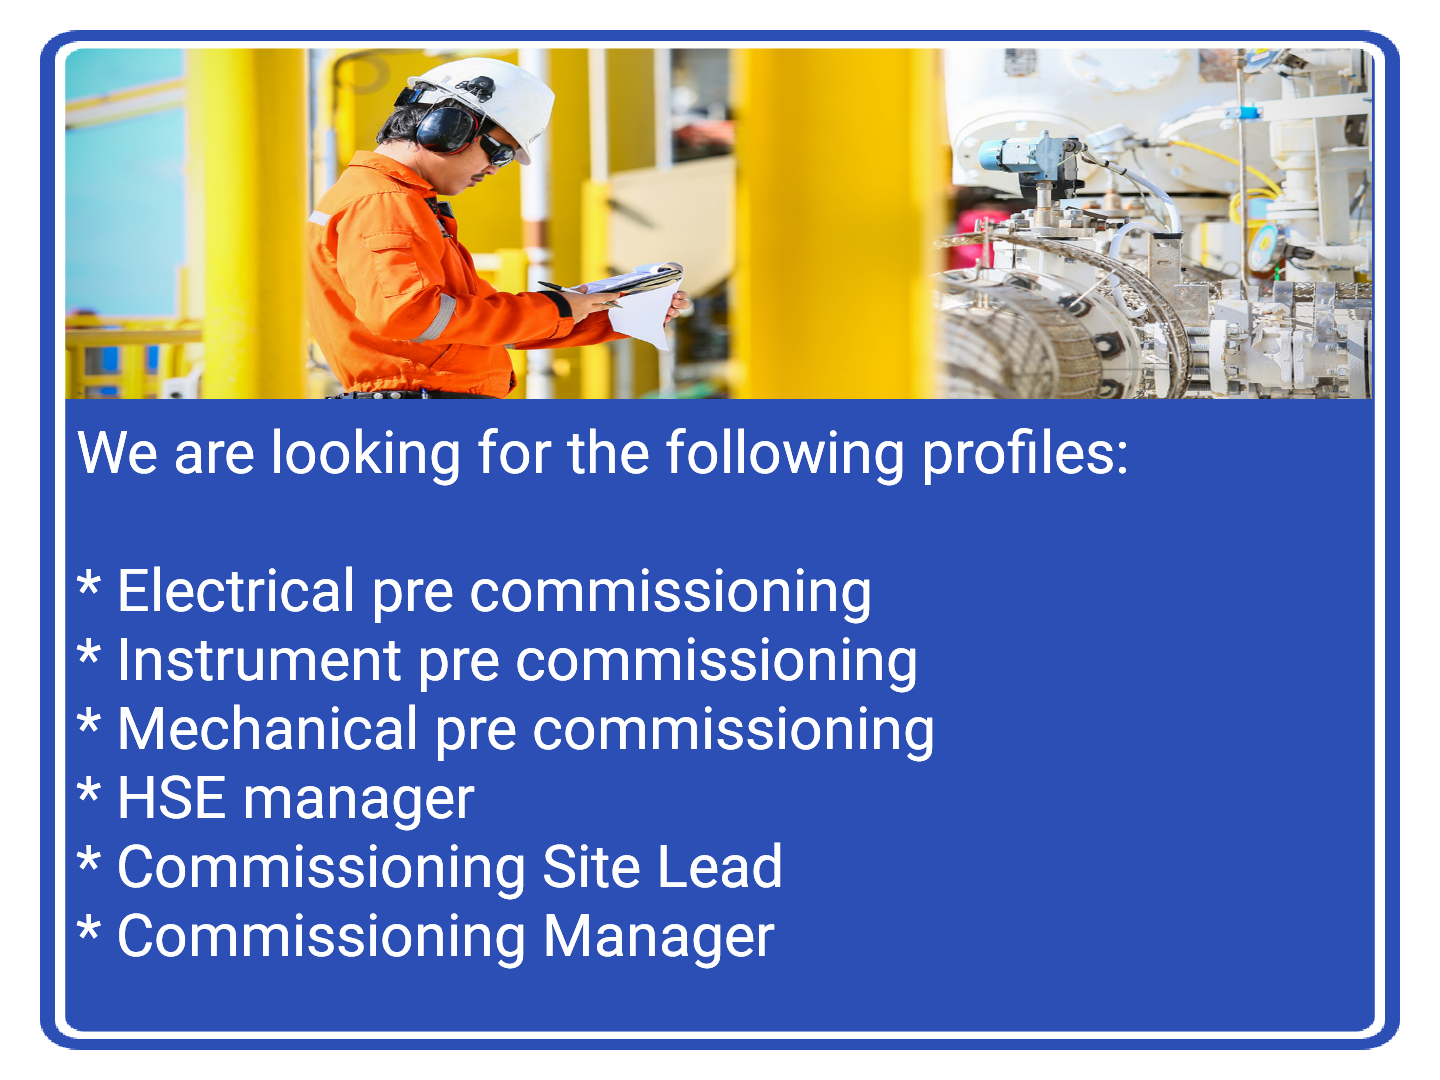 Commissioning jobs pre 